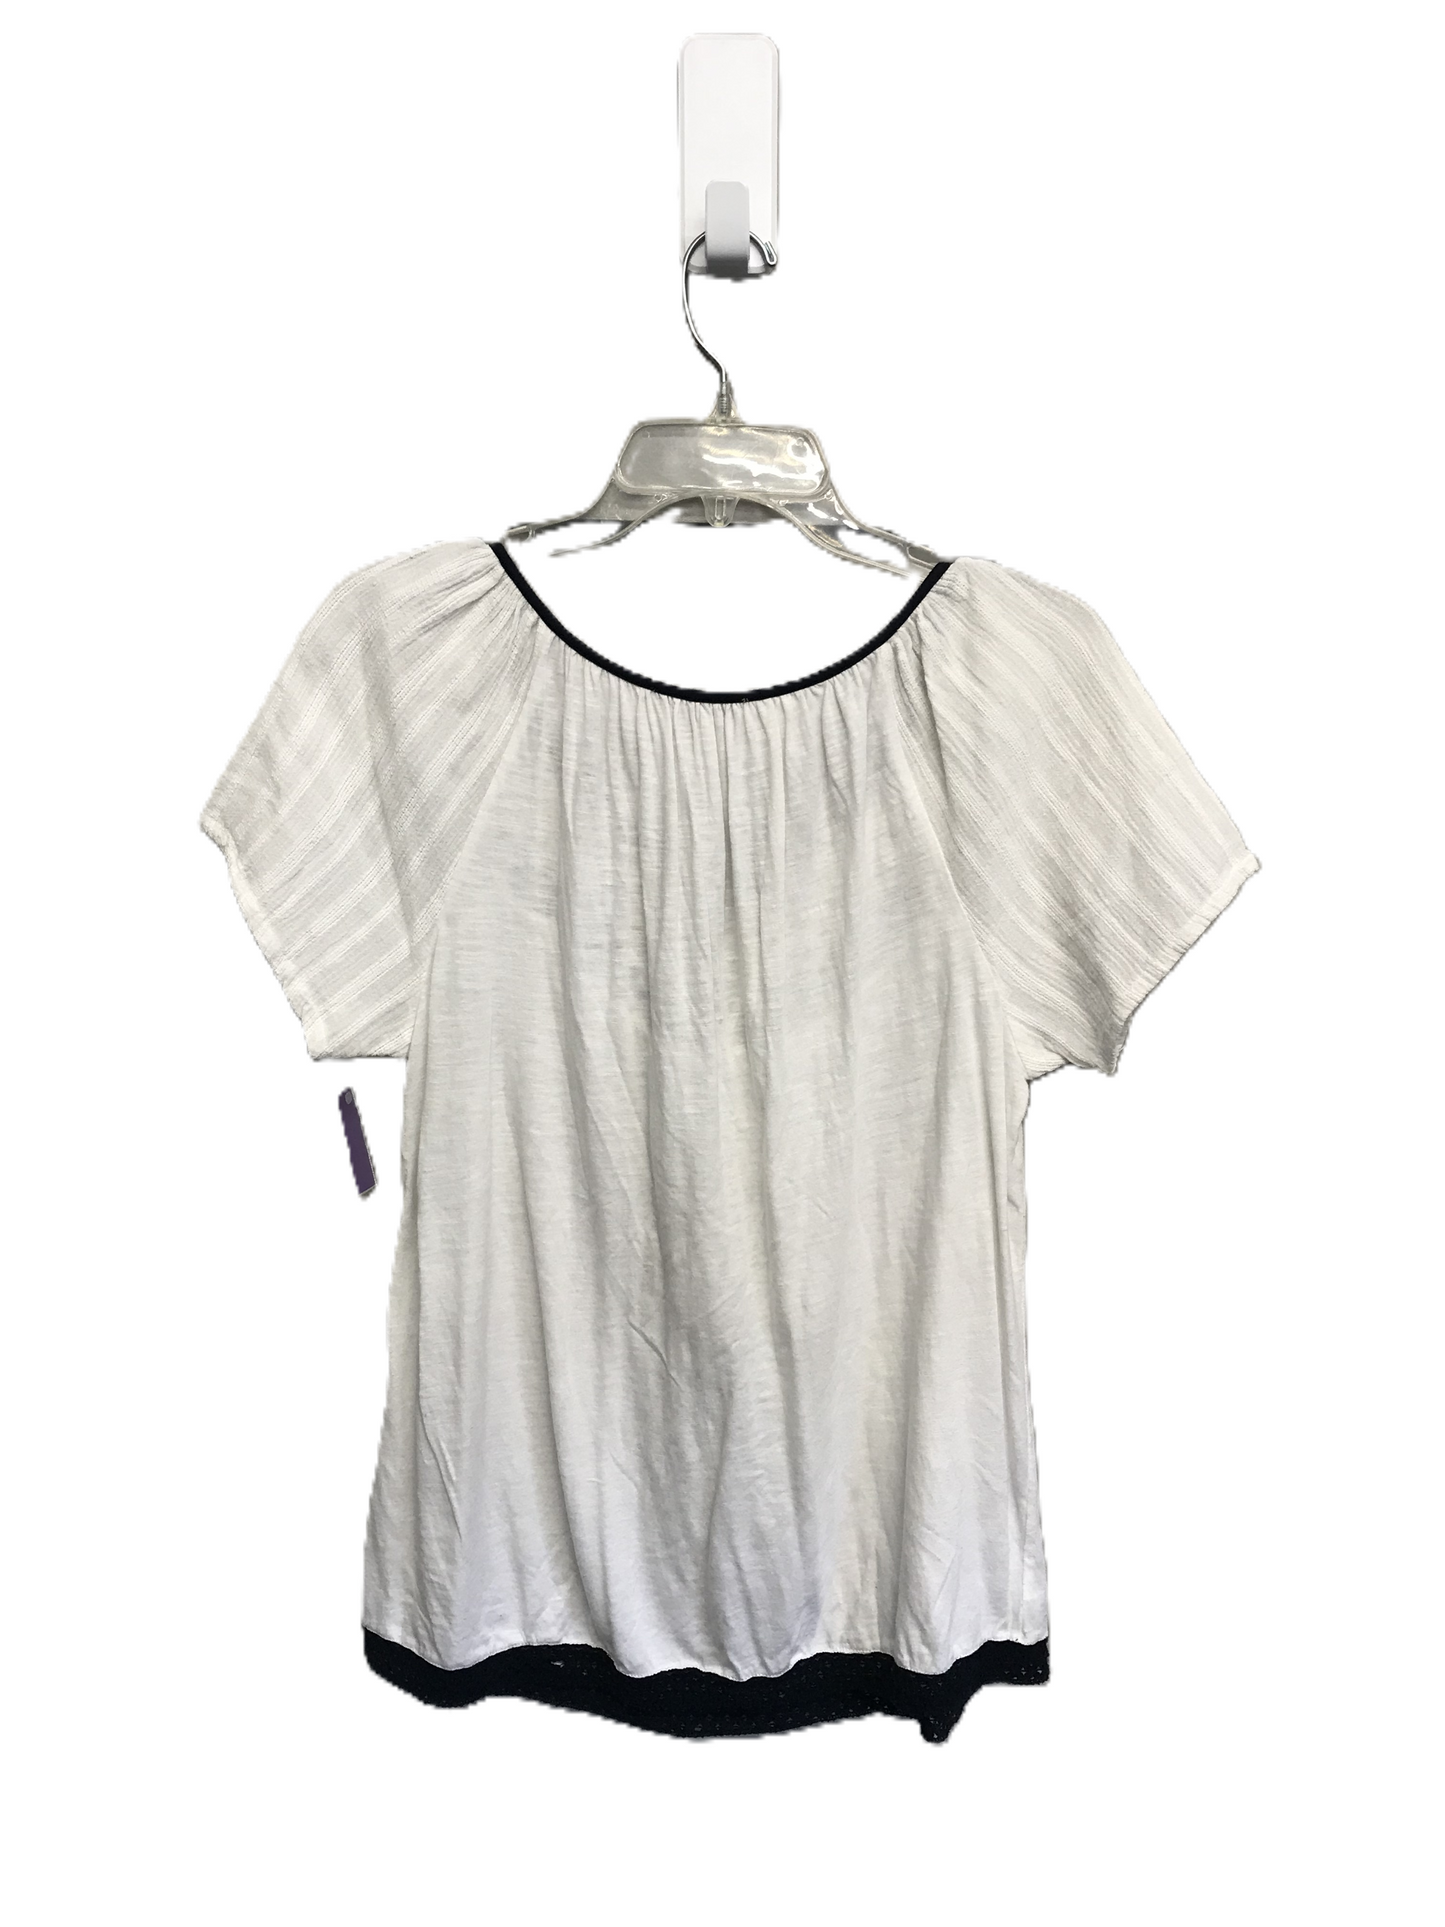 White Top Short Sleeve By Lucky Brand, Size: L